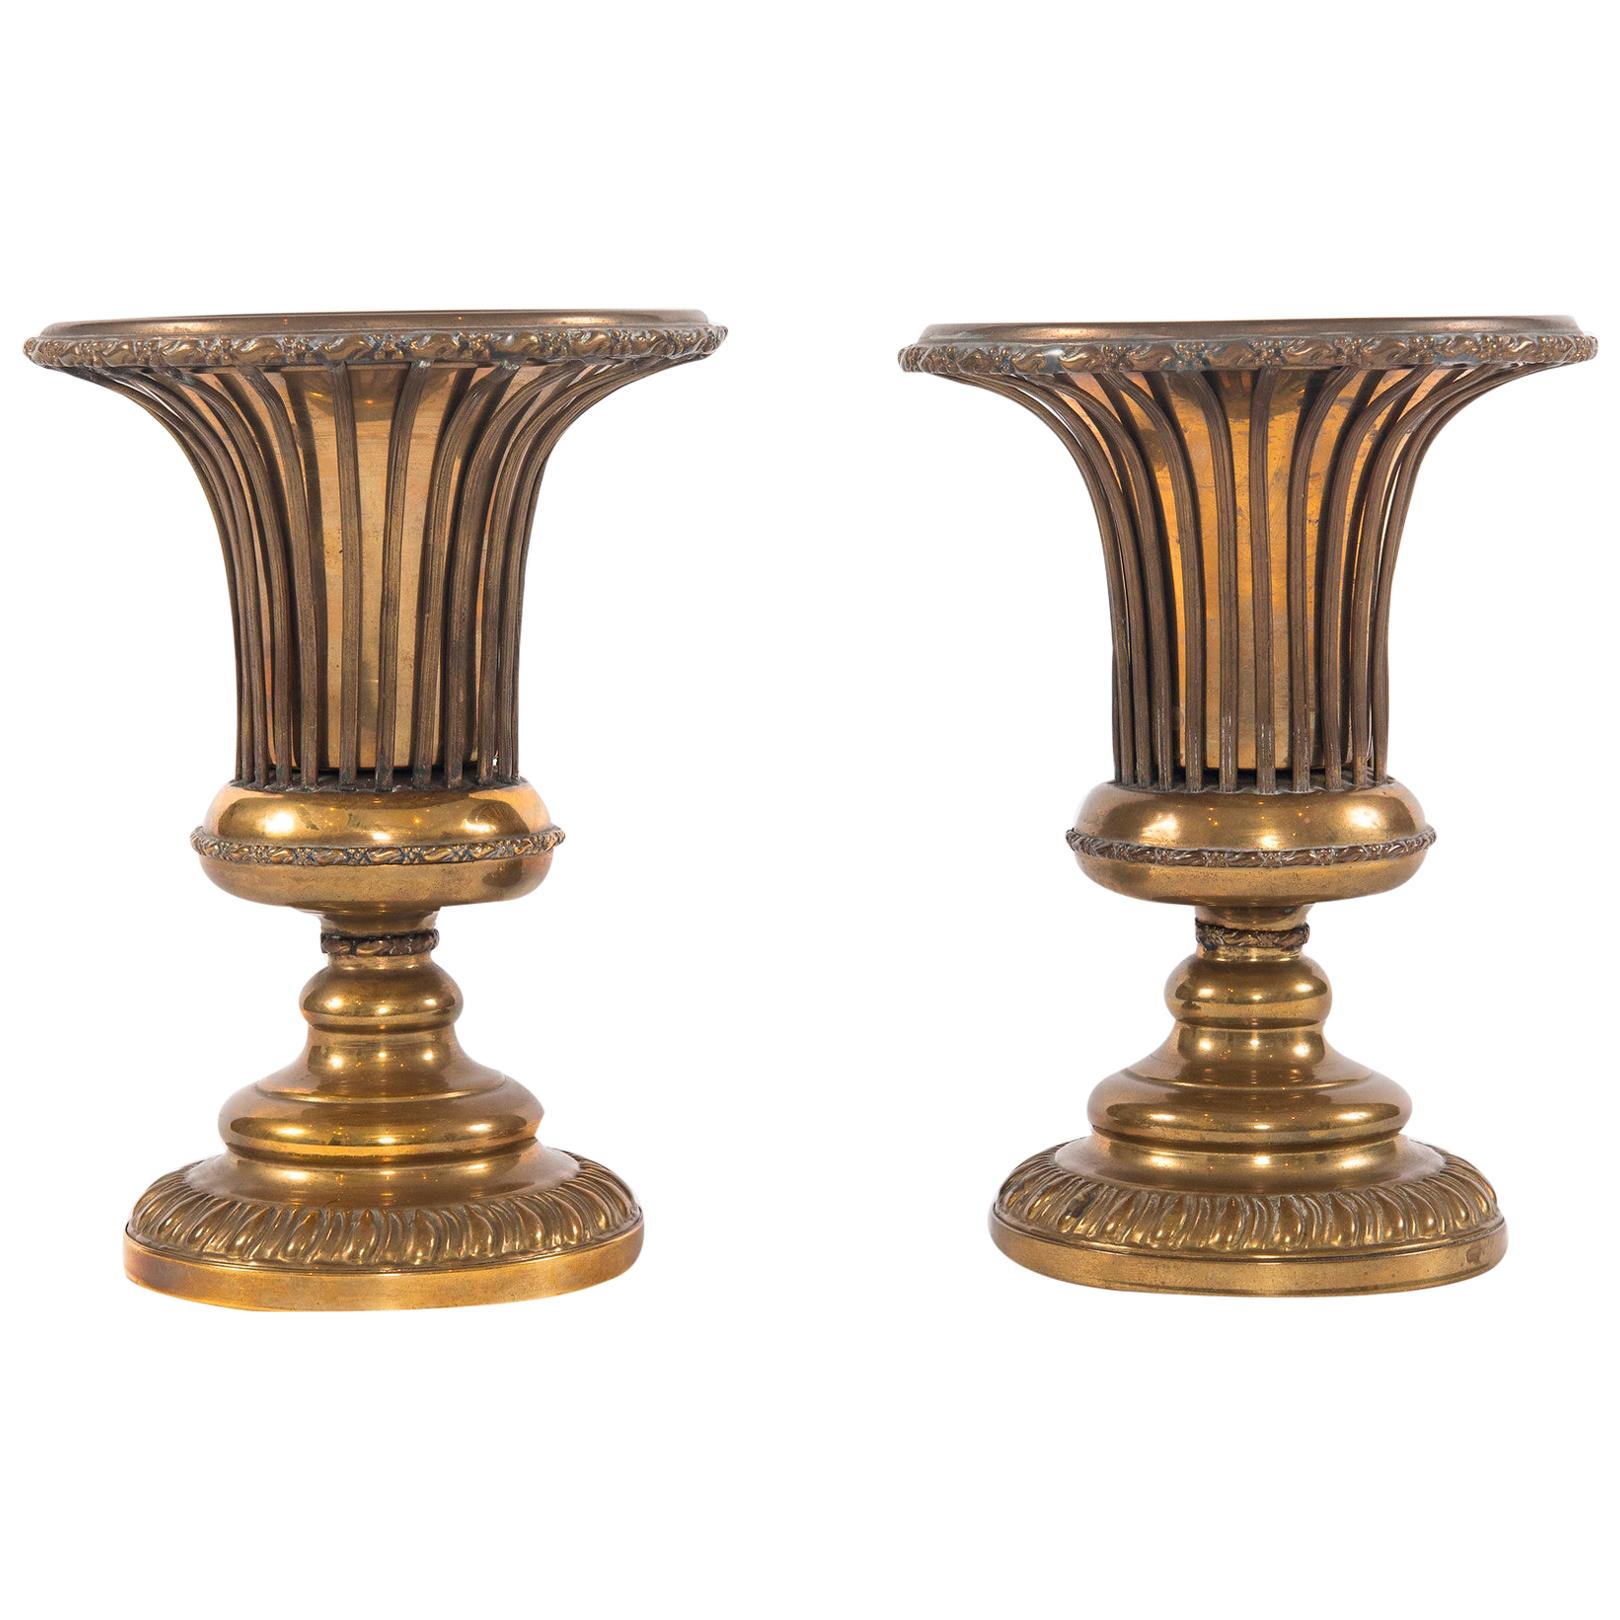 Vintage Pair of Brass Urns with Removable Liners